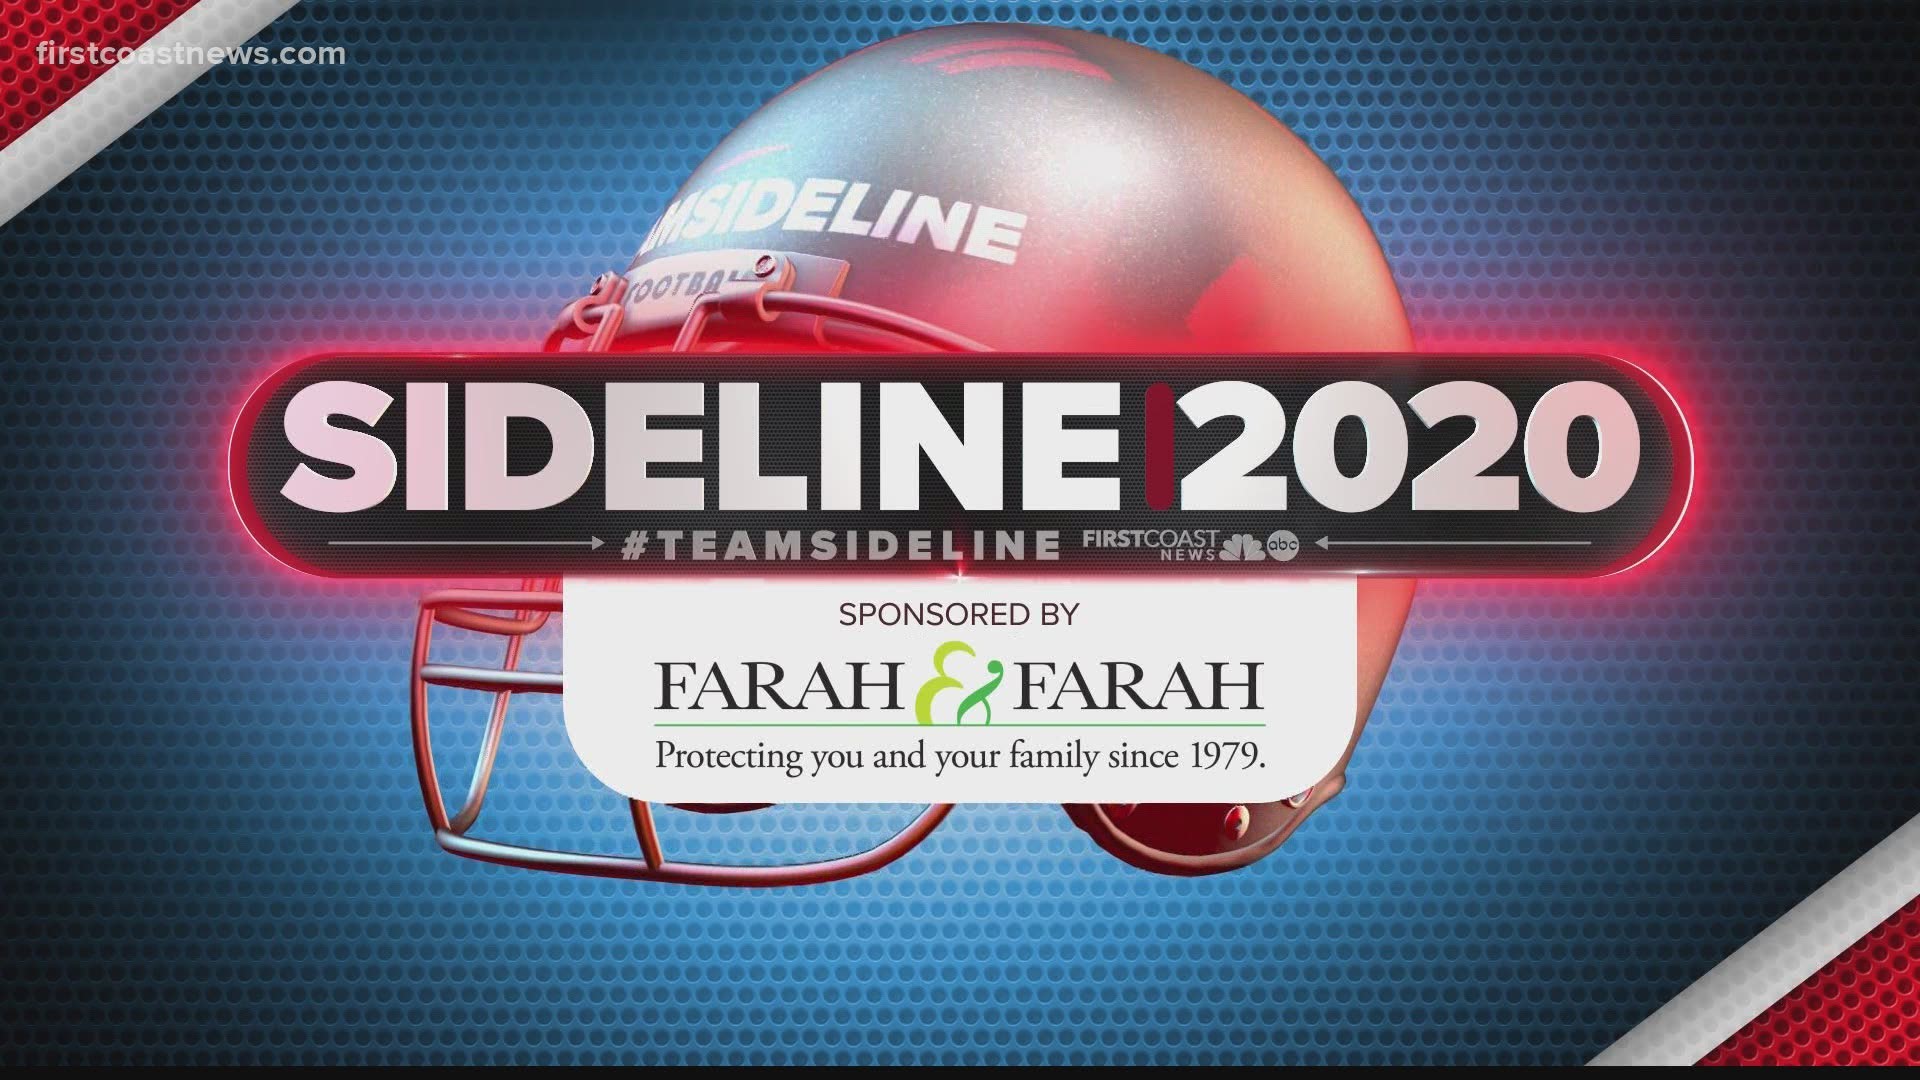 Part one of our kickoff to Sideline 2020